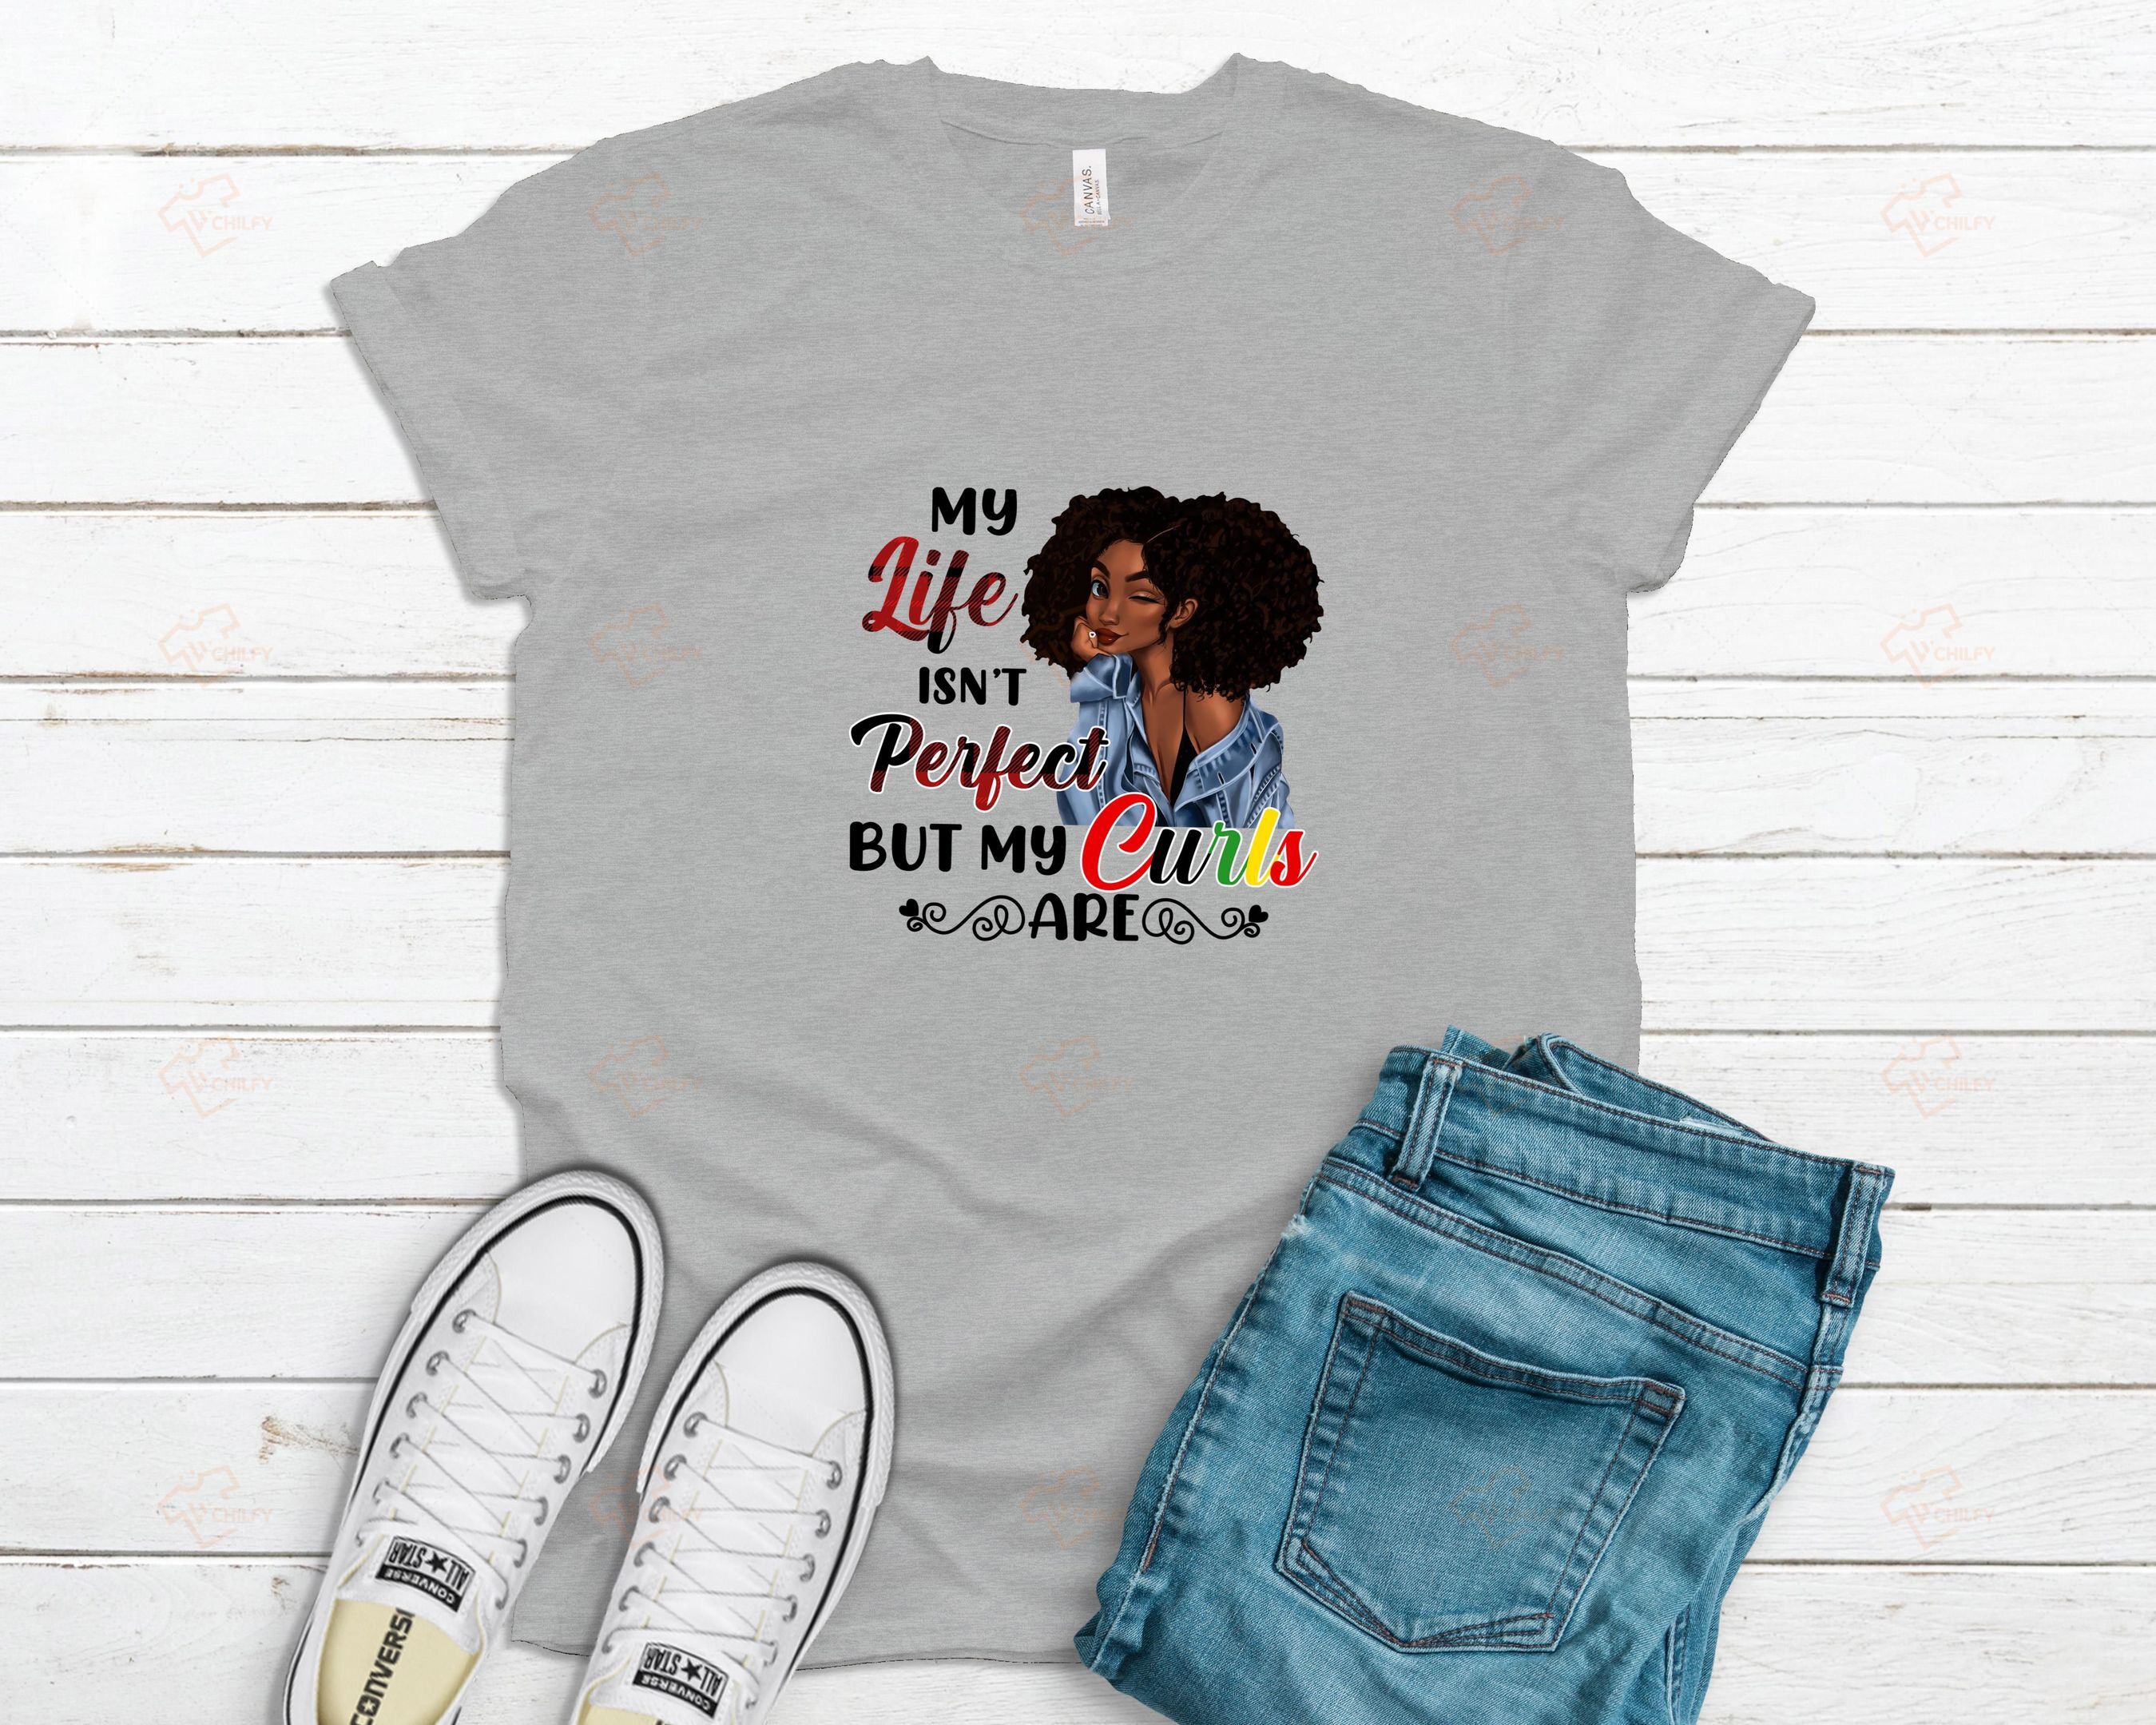 My life isn’t perfect but my curls are, afro girl shirt, black girl shirt